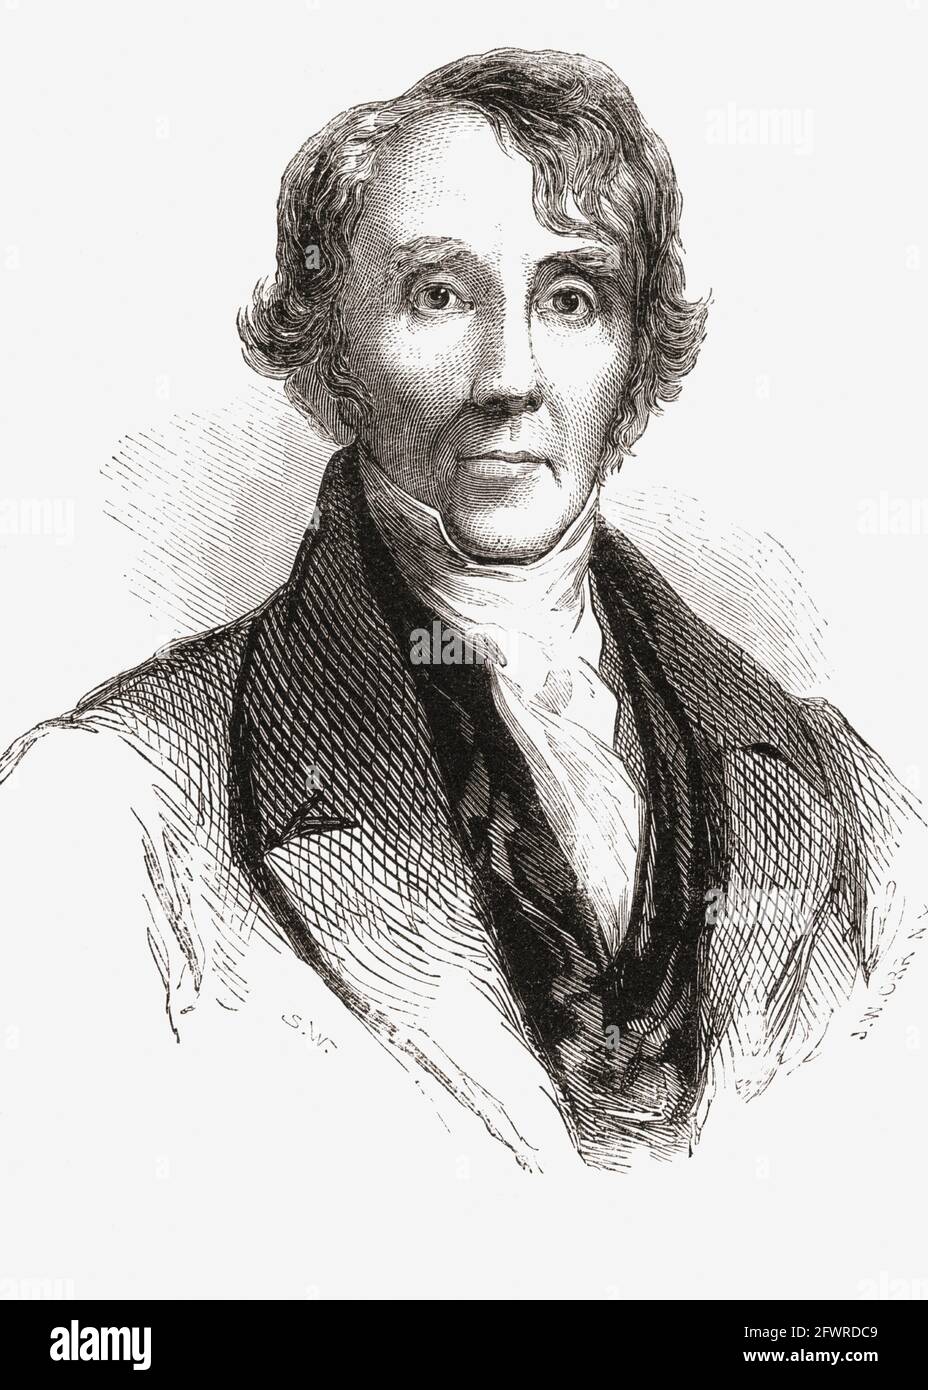 William Ellery Channing, 1780 – 1842.  American Unitarian preacher and theologian.  After a 19th century print. Stock Photo